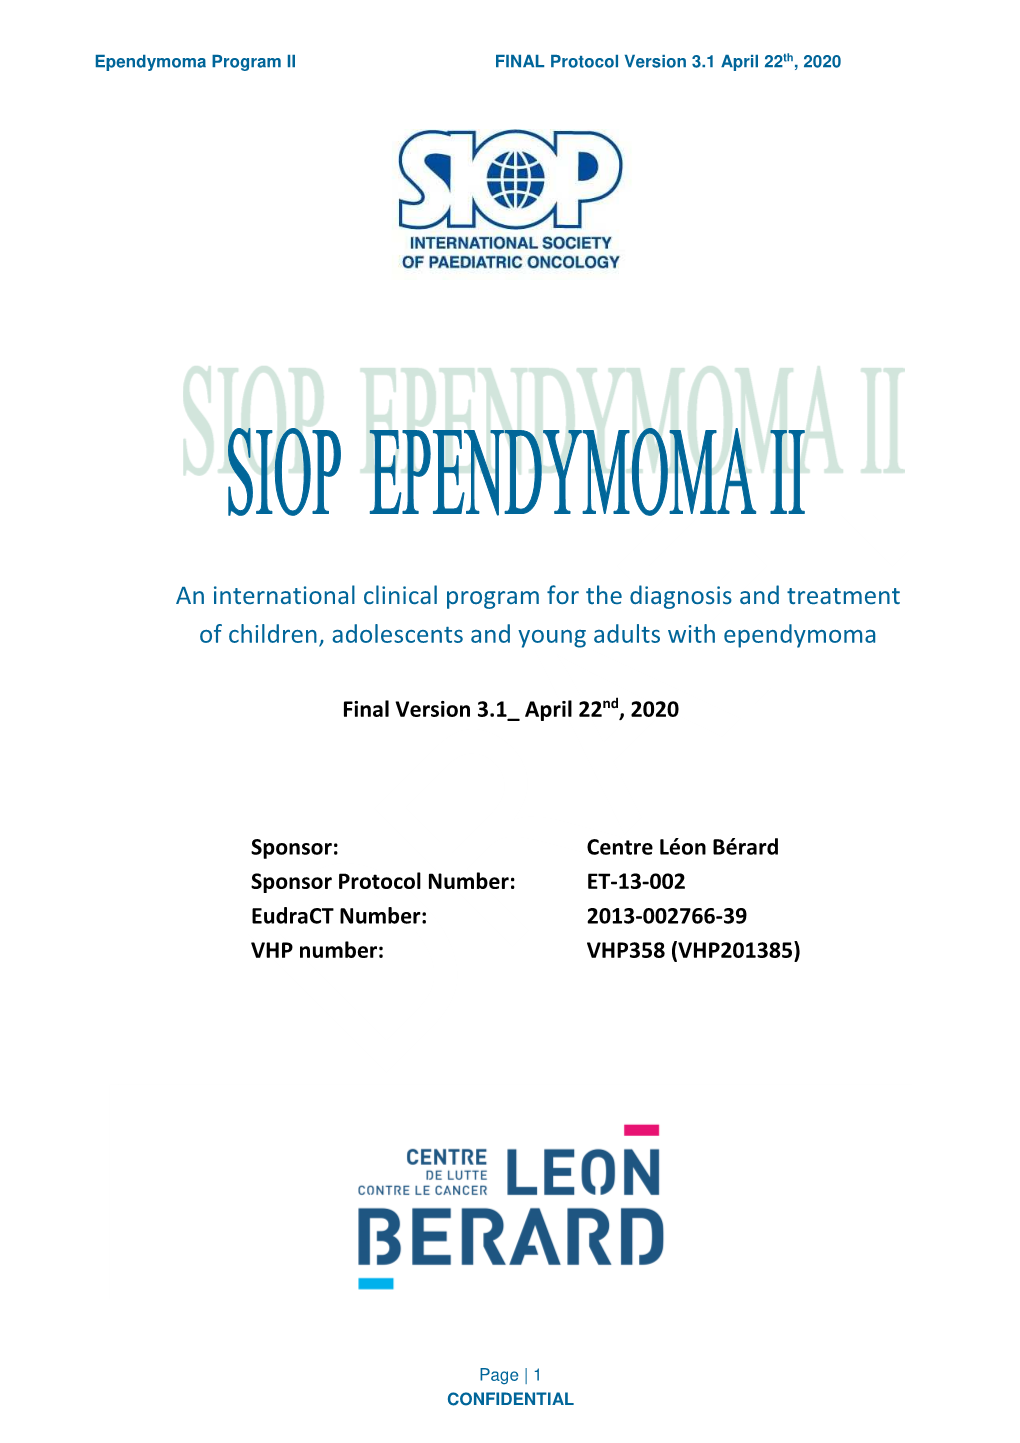 SIOP Ependymoma II Protocol V3.1 22 April 2020 Clean